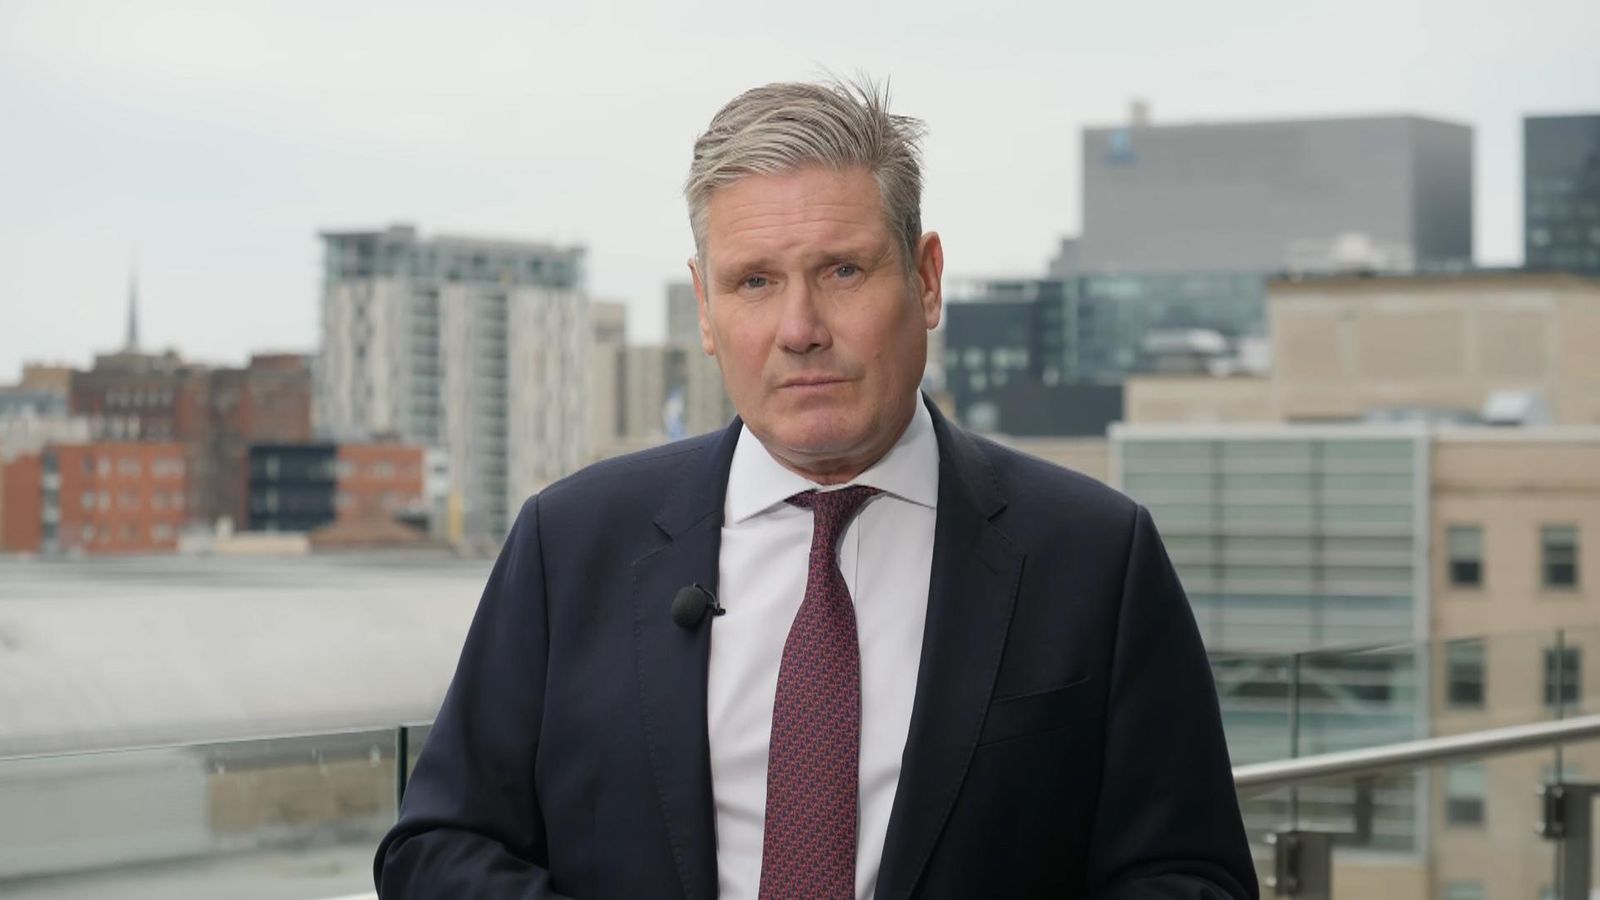 Keir Starmer rejects 'nonsense' claims that Labour's immigration plans would increase asylum seeker numbers